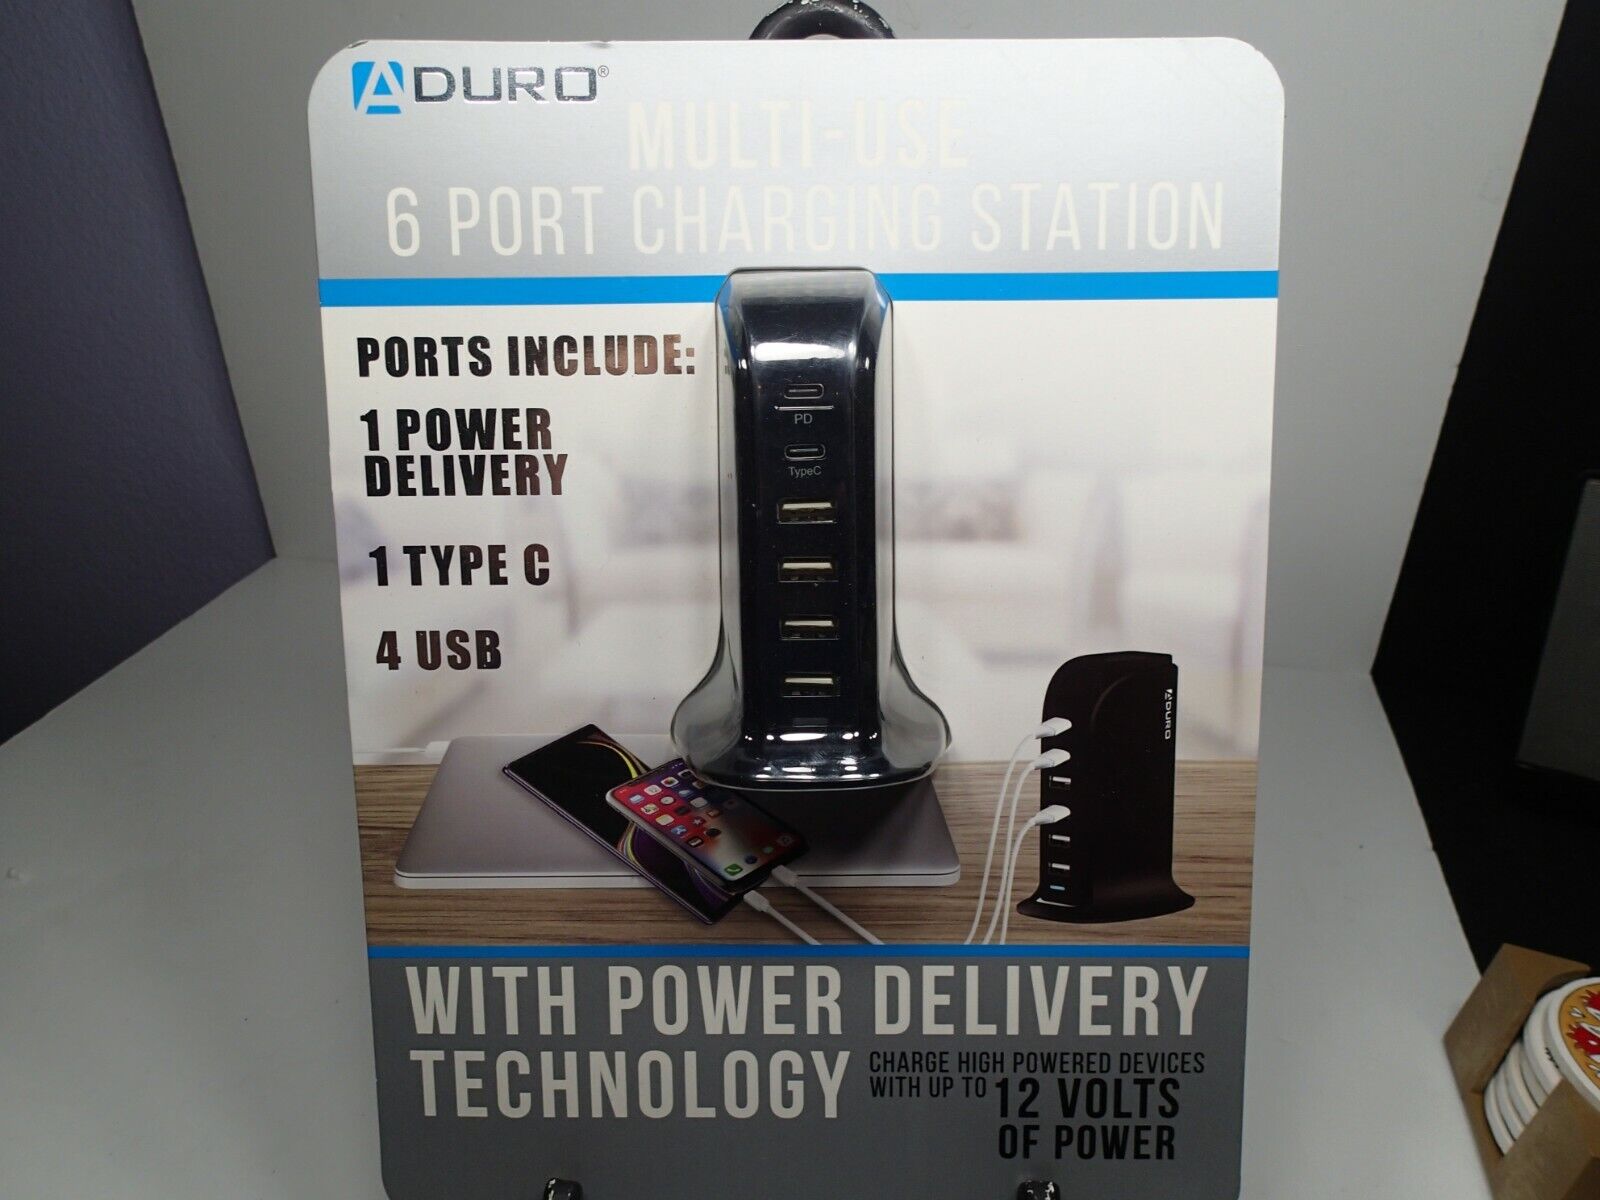 Aduro Multi Use 6 Port Charging Station 1 Power Delivery 1 Type C and 4 USB New